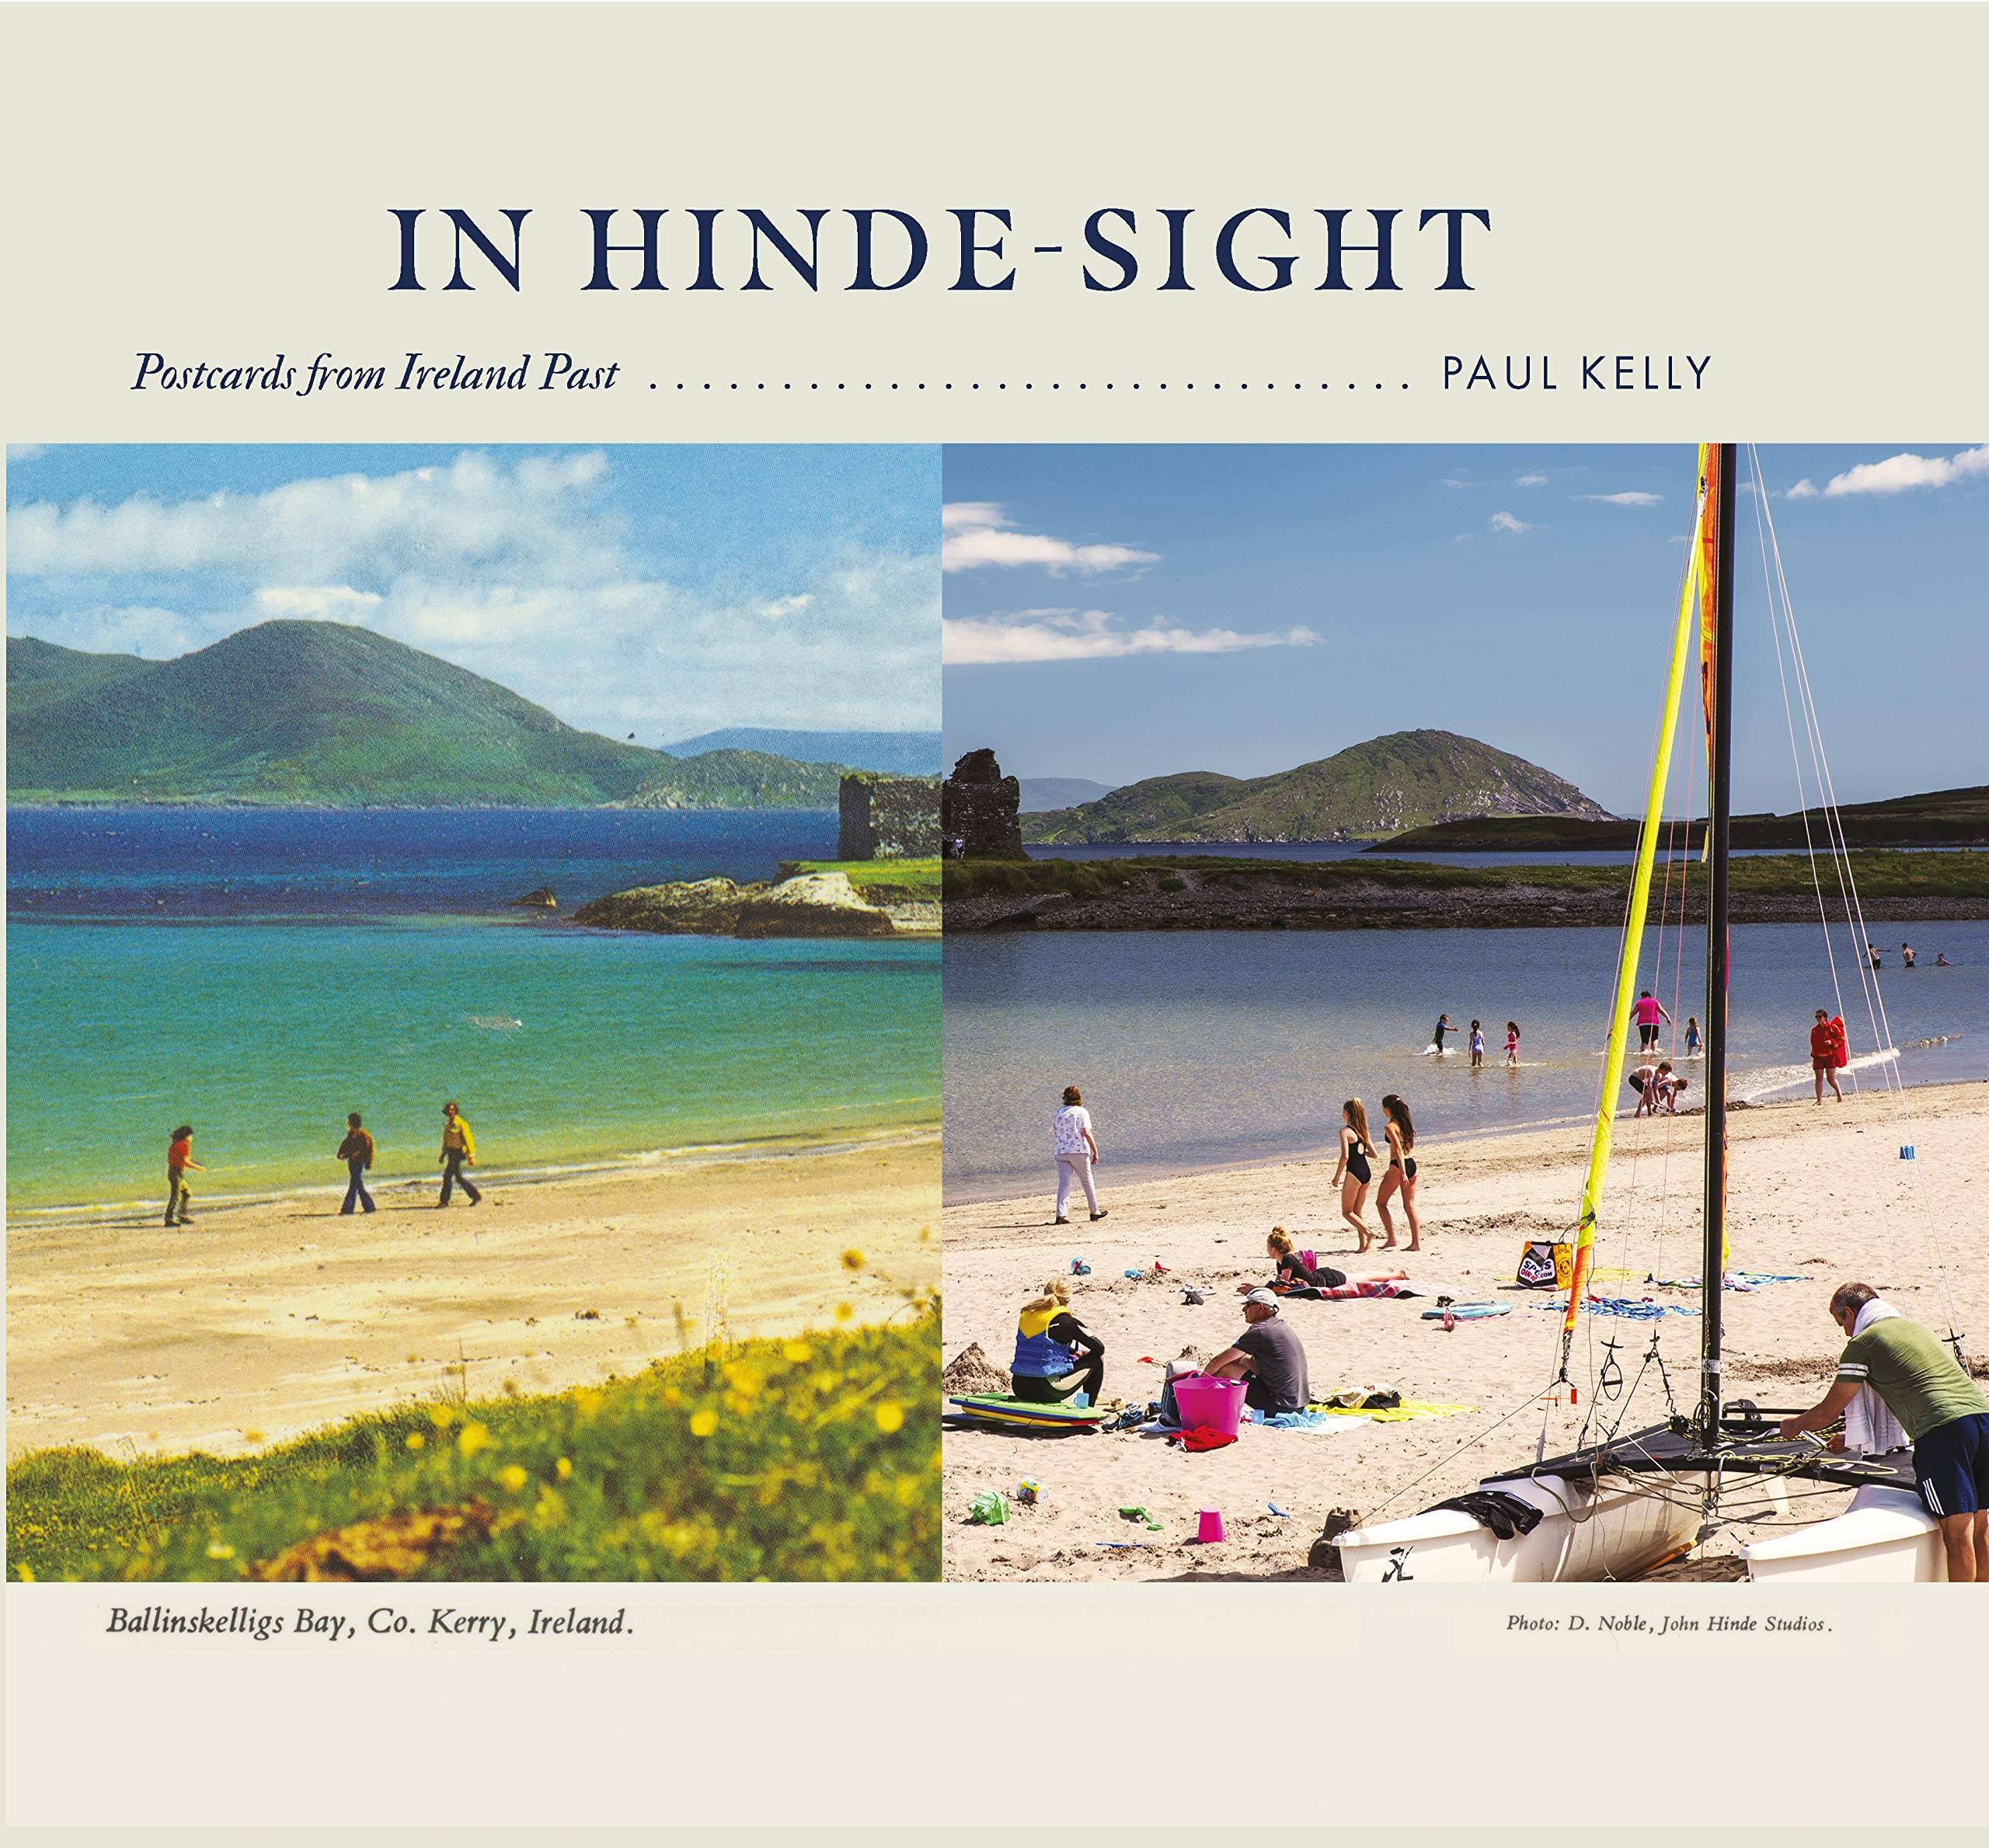 In Hinde Sight by Paul Kelly